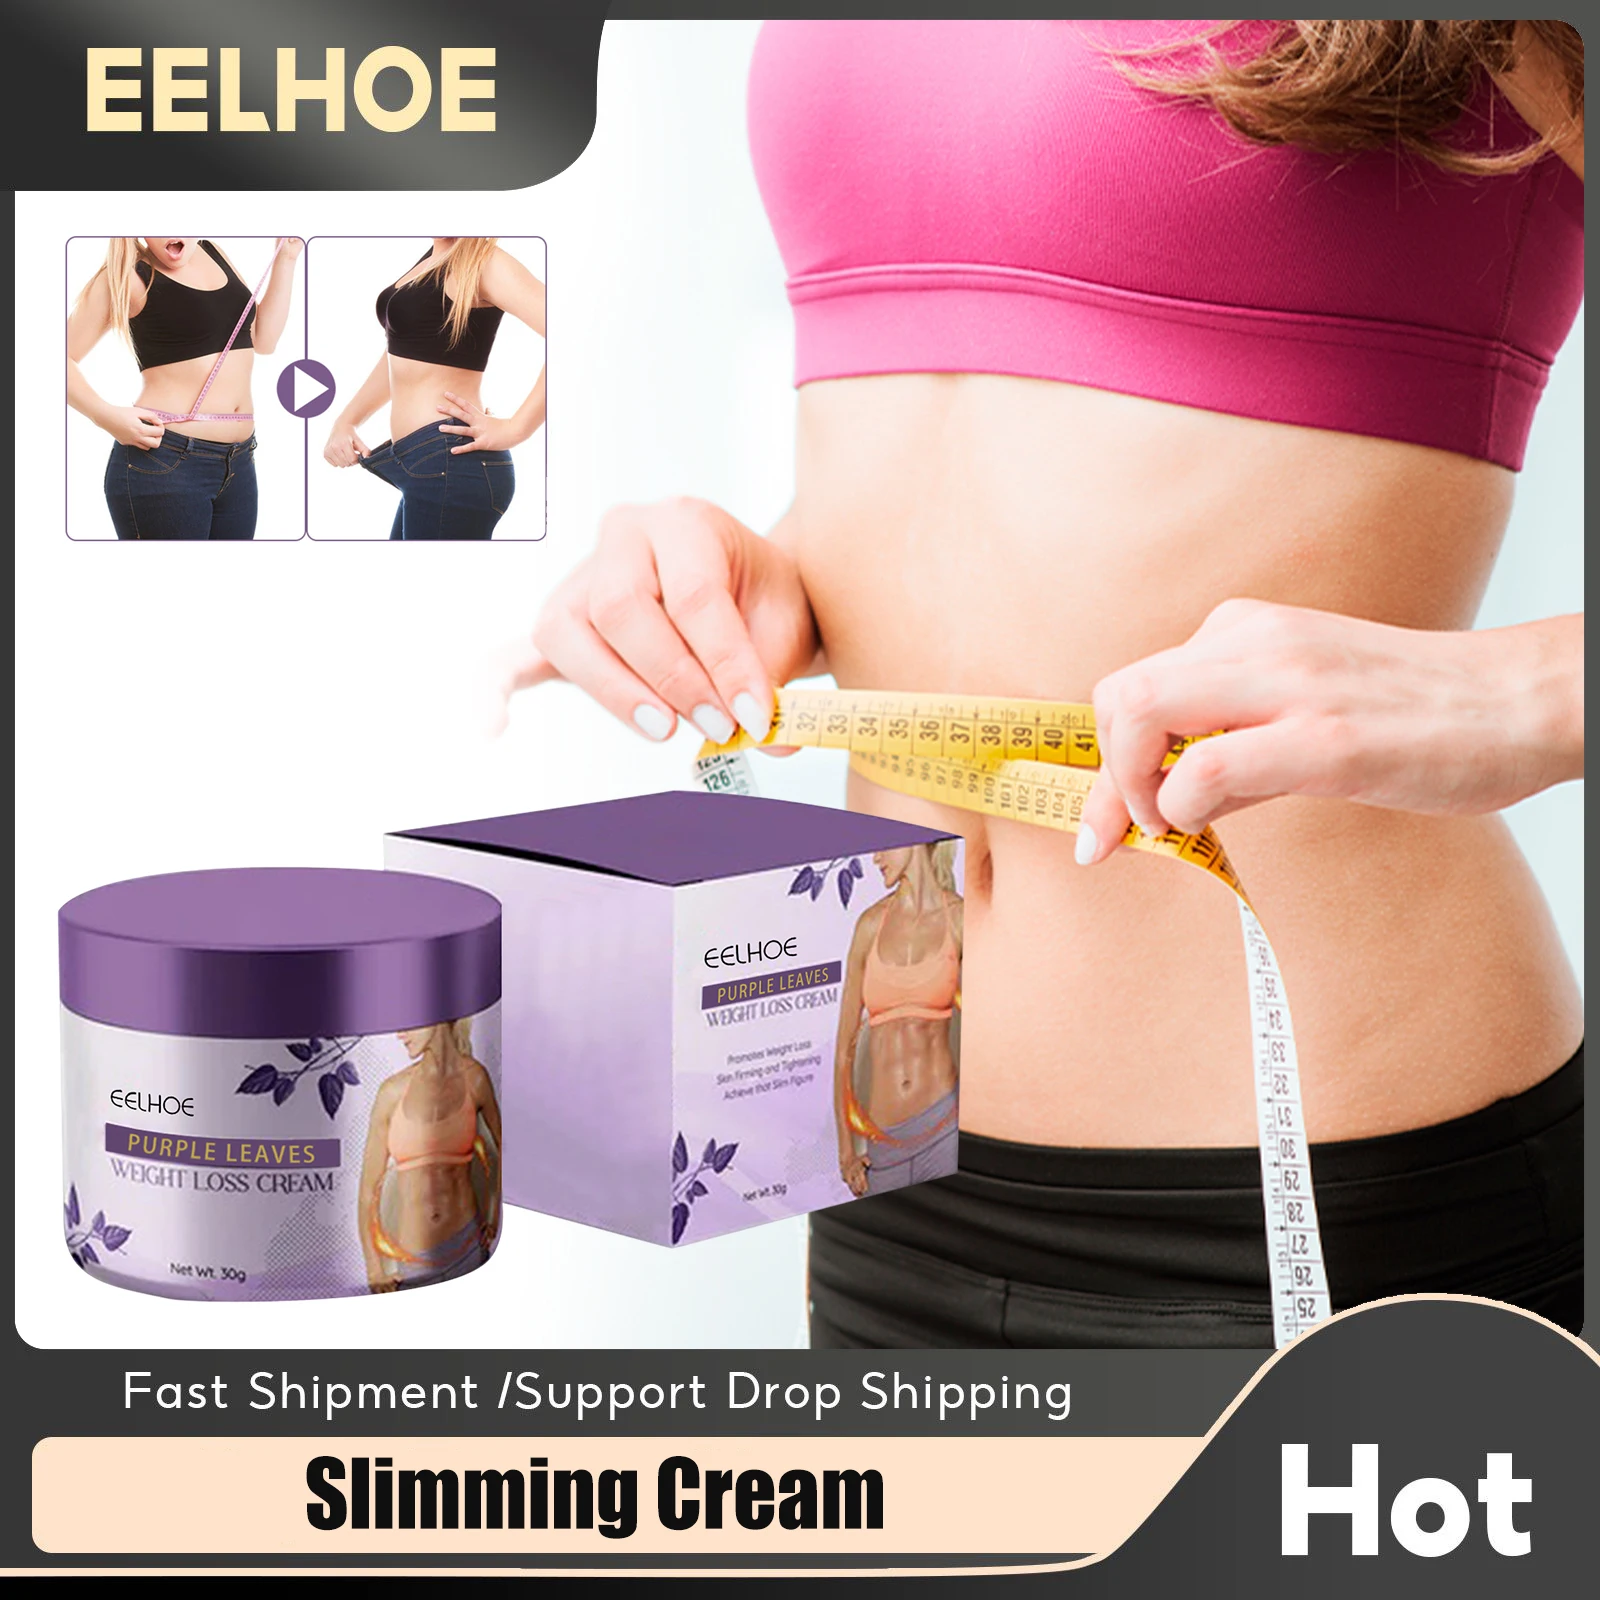 

EELHOE Slimming Cream Weight Loss Remove Cellulite Firming Lifting Shaping Body Care Product Quickly Belly Fat Burning Cream 30g